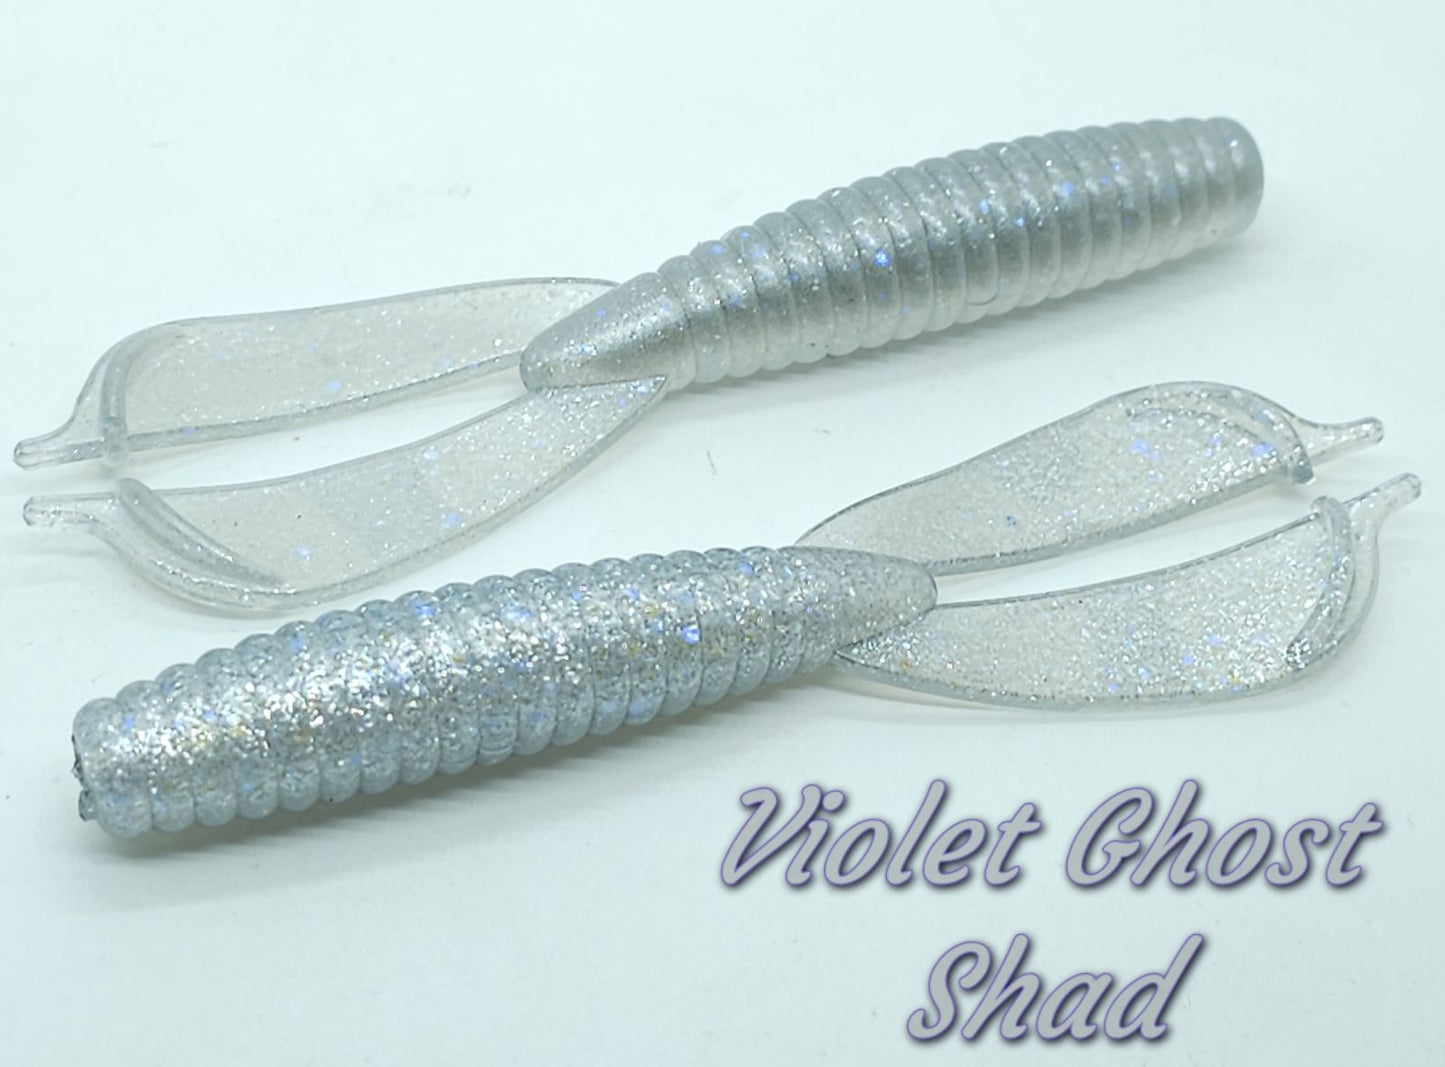 DC-5 Double Cross Violet Ghost Shad 3.5" Grub 8 pack